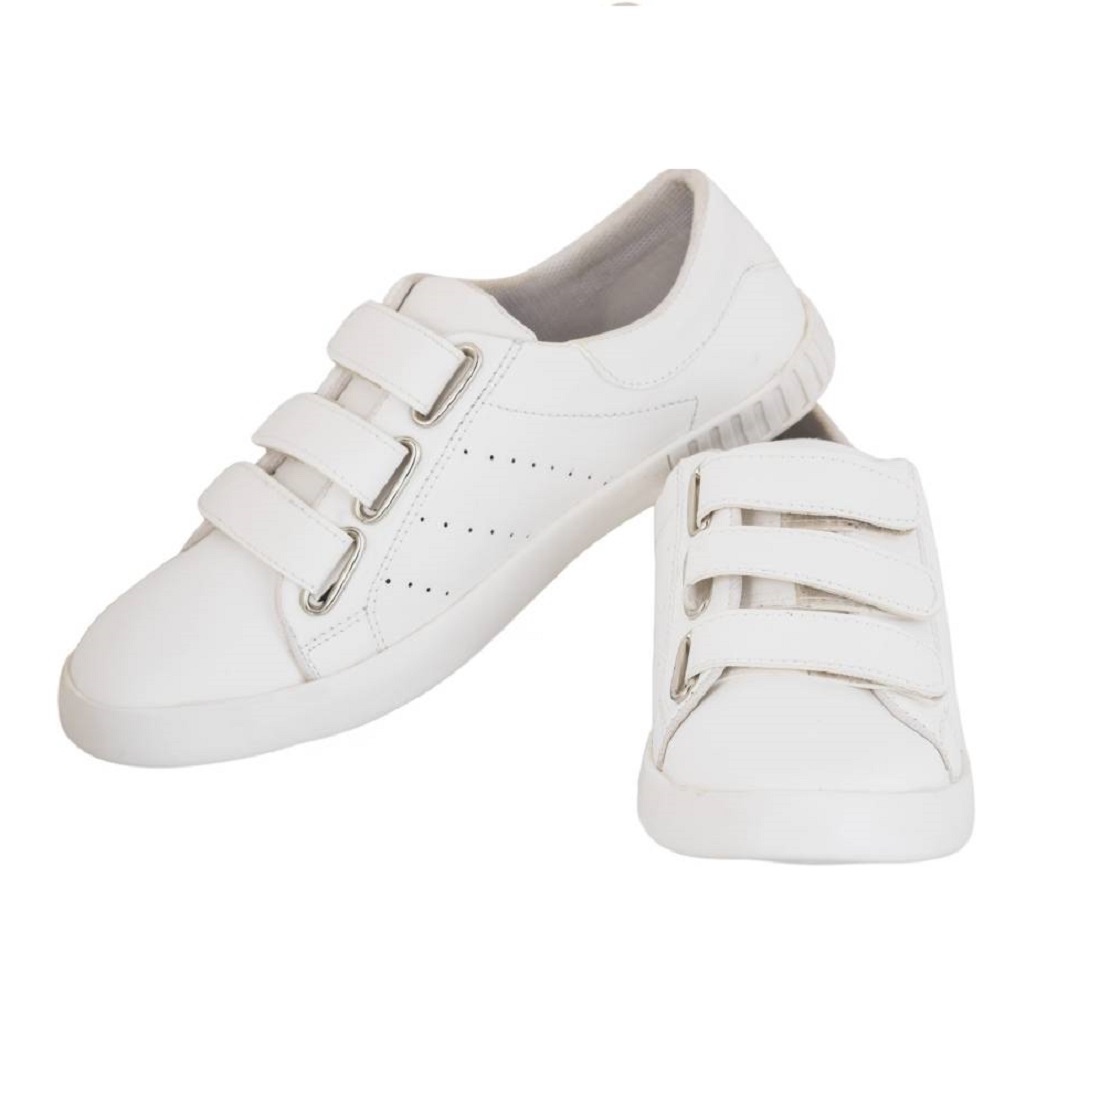 Buy Blinder Men's Pure White Velcro Casual Shoes Online @ ₹499 from ...